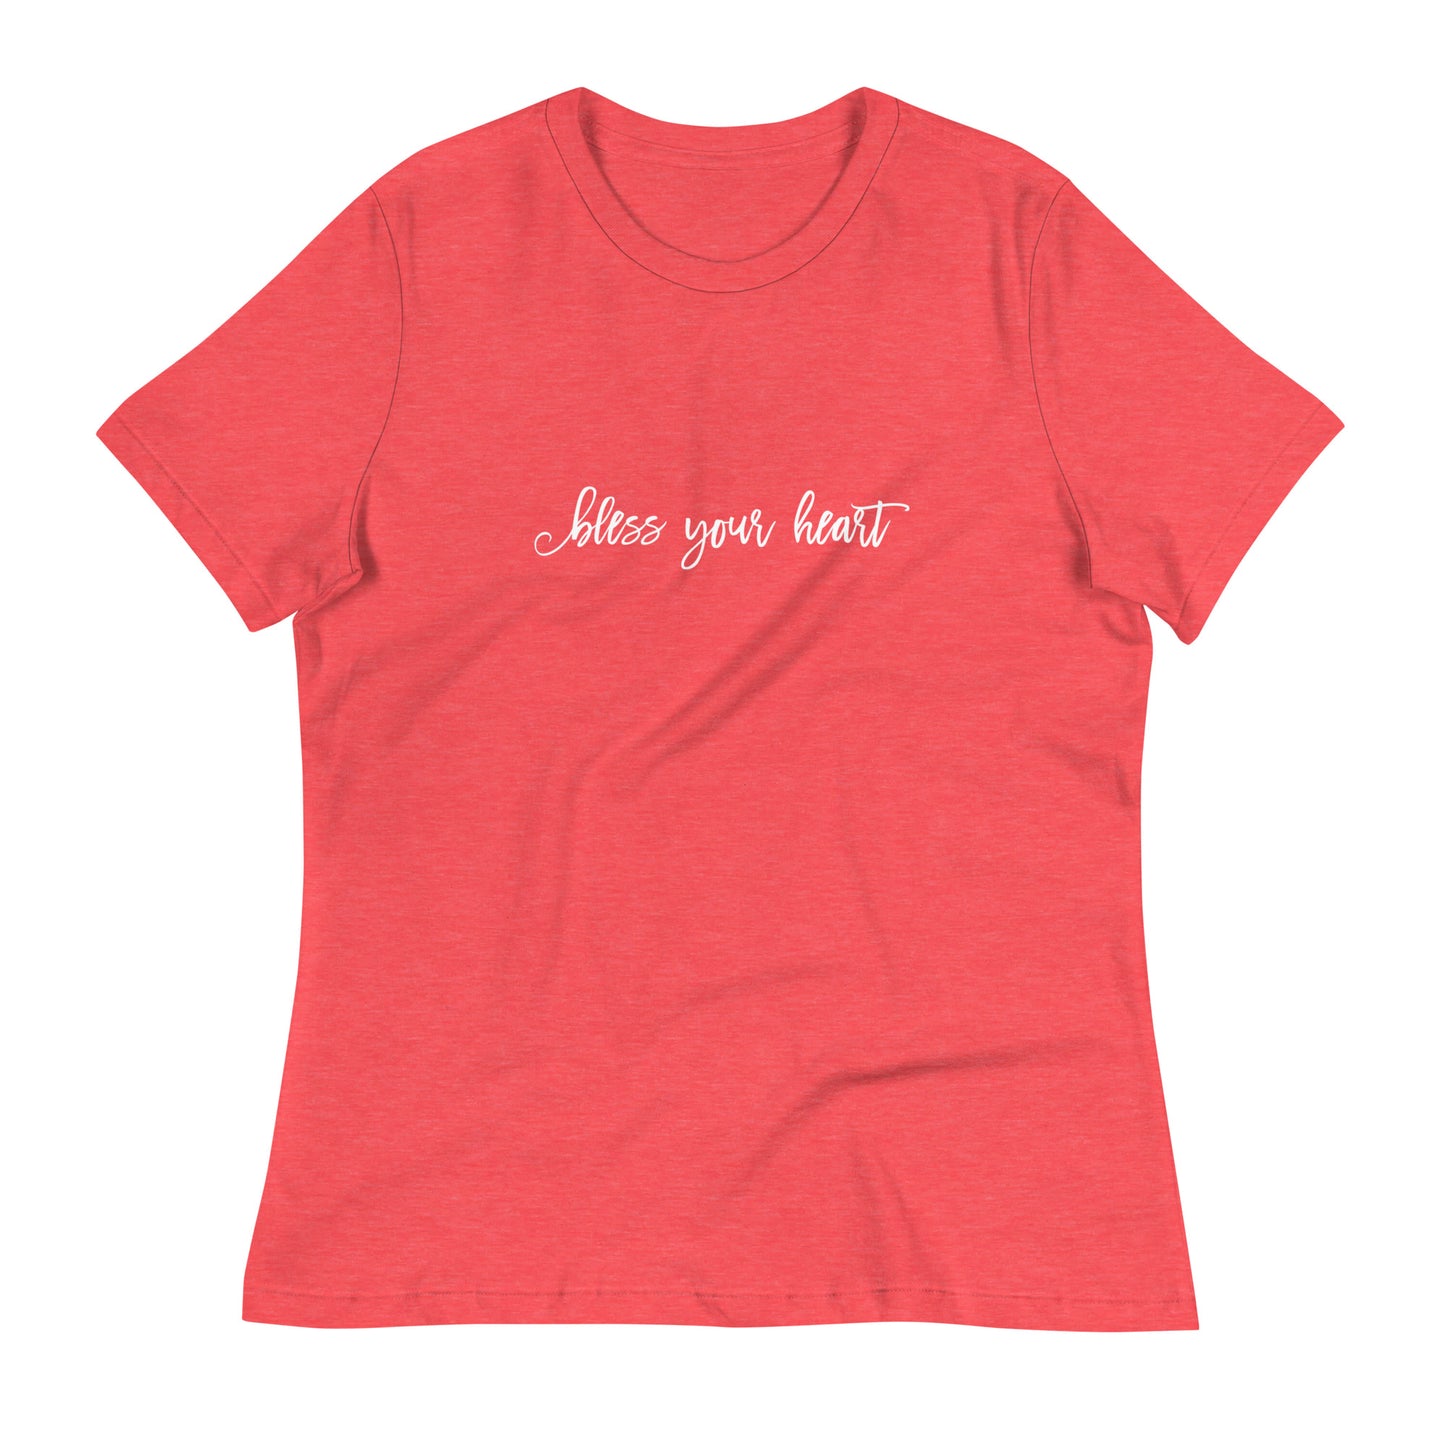 Heather Red women's relaxed fit t-shirt with white graphic in an excessively twee font: "bless your heart"